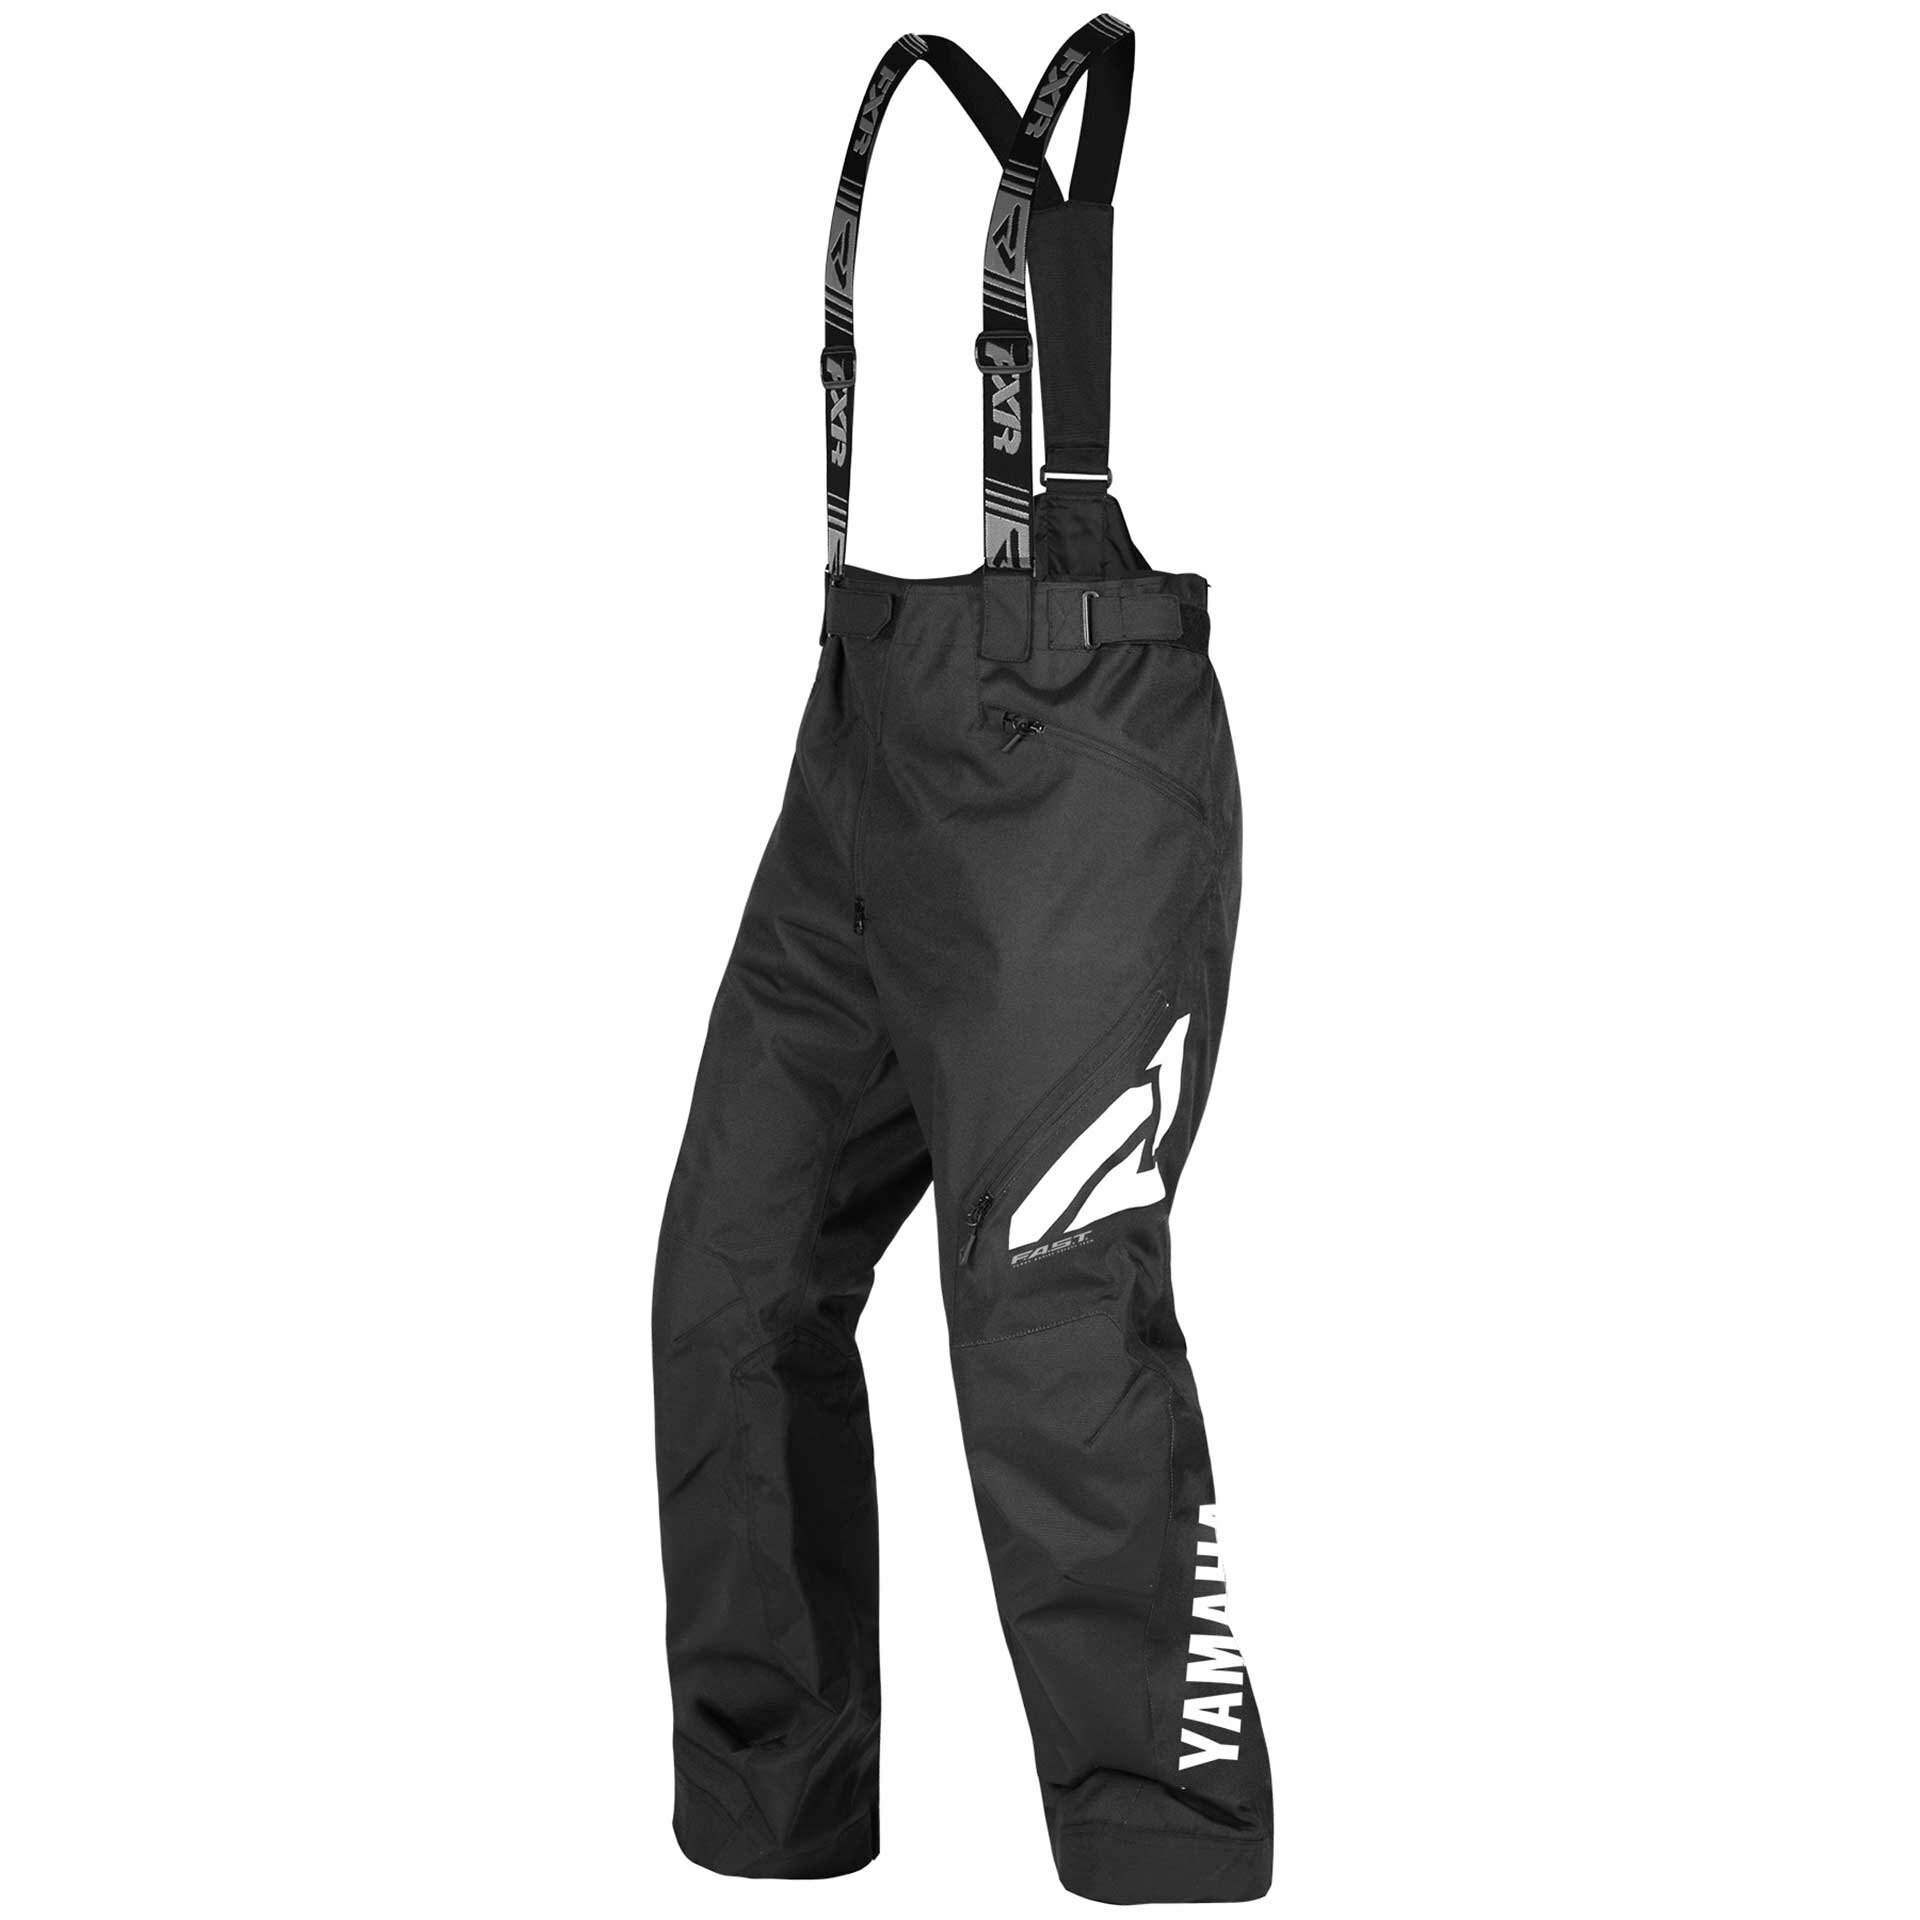 Yamaha Clutch FX Pant by FXR® Large black/white